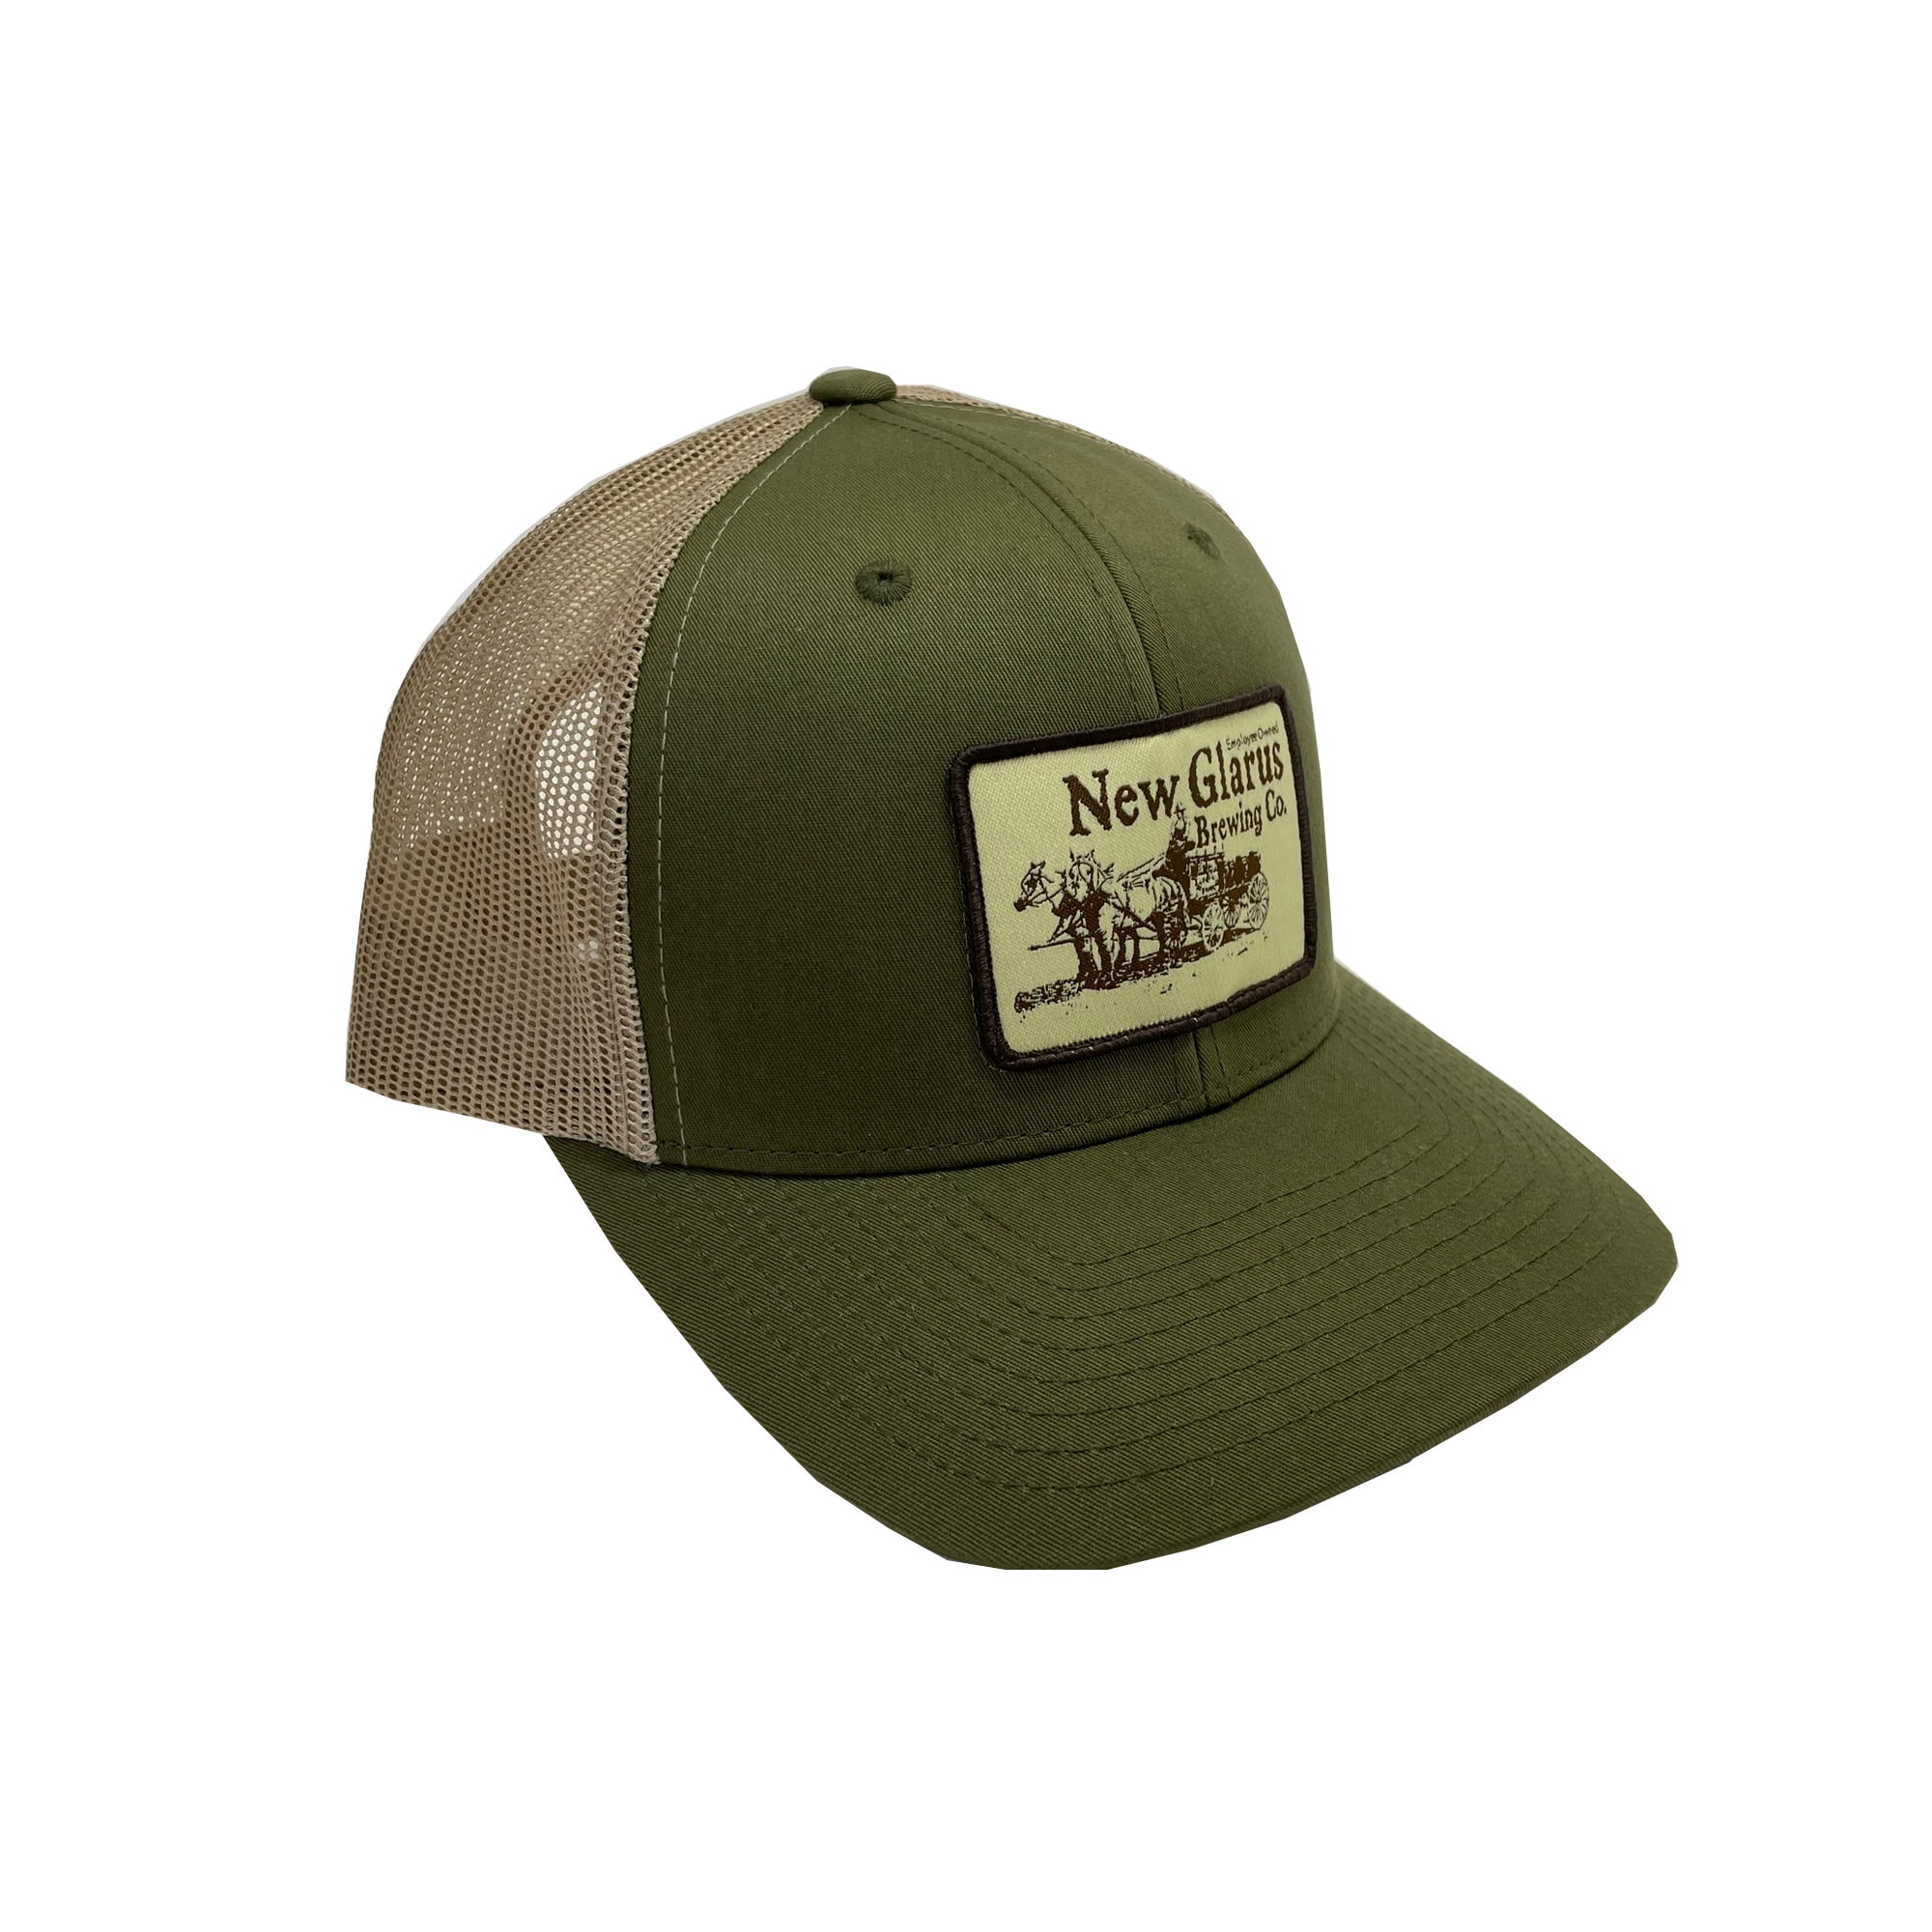 Sage green hat with beige mesh back and a rectangular patch with a Horse and Wagon New Glarus Brewing Co. logo.